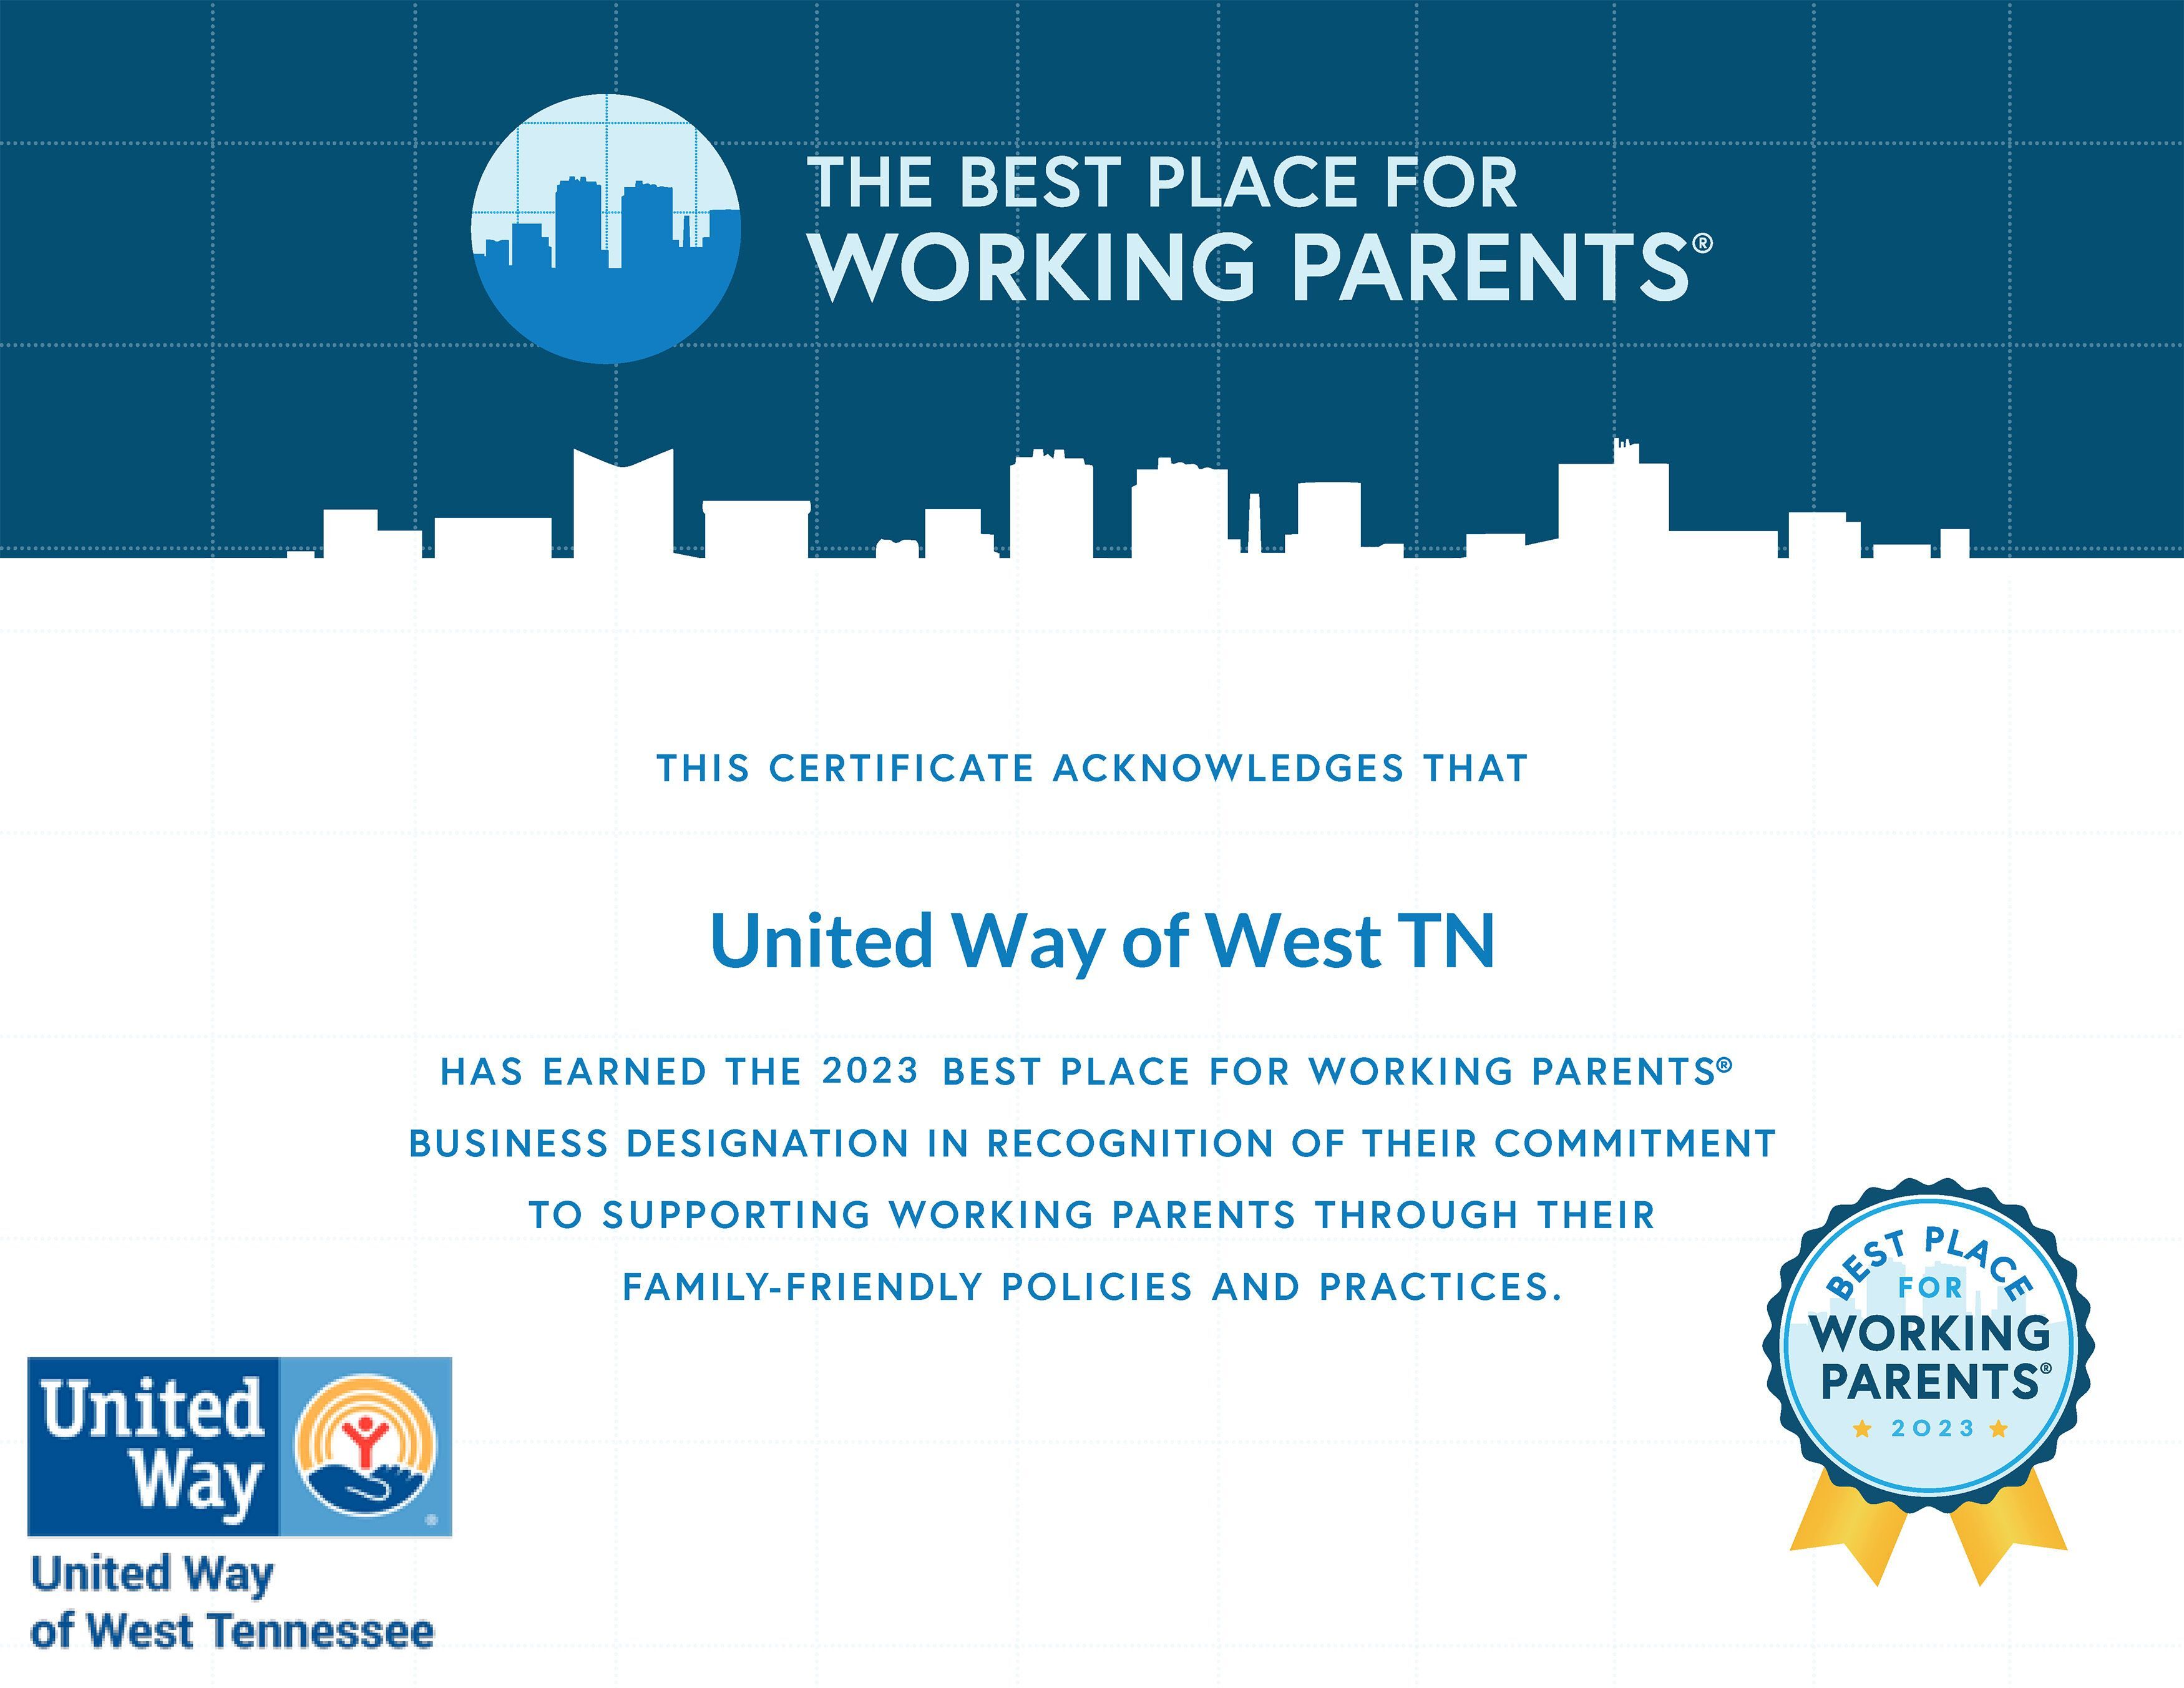 United Way of West TN and Other Local Nonprofits Named a 2023 Best Place for Working Parents